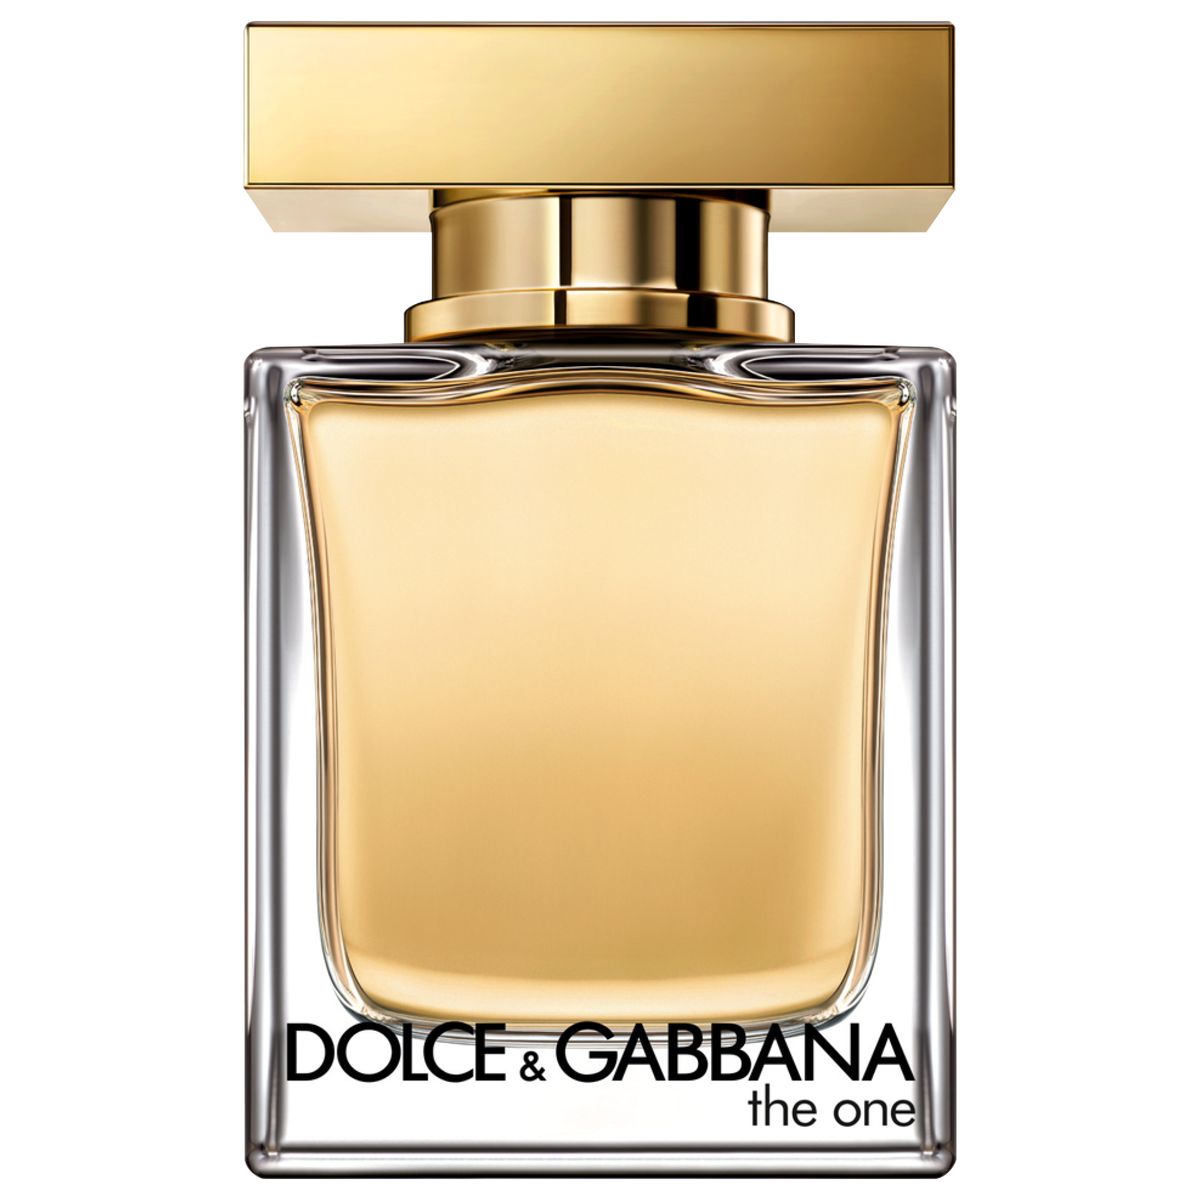 Dolce&Gabbana The One EDT 50ml | Buy Online in South Africa | takealot.com